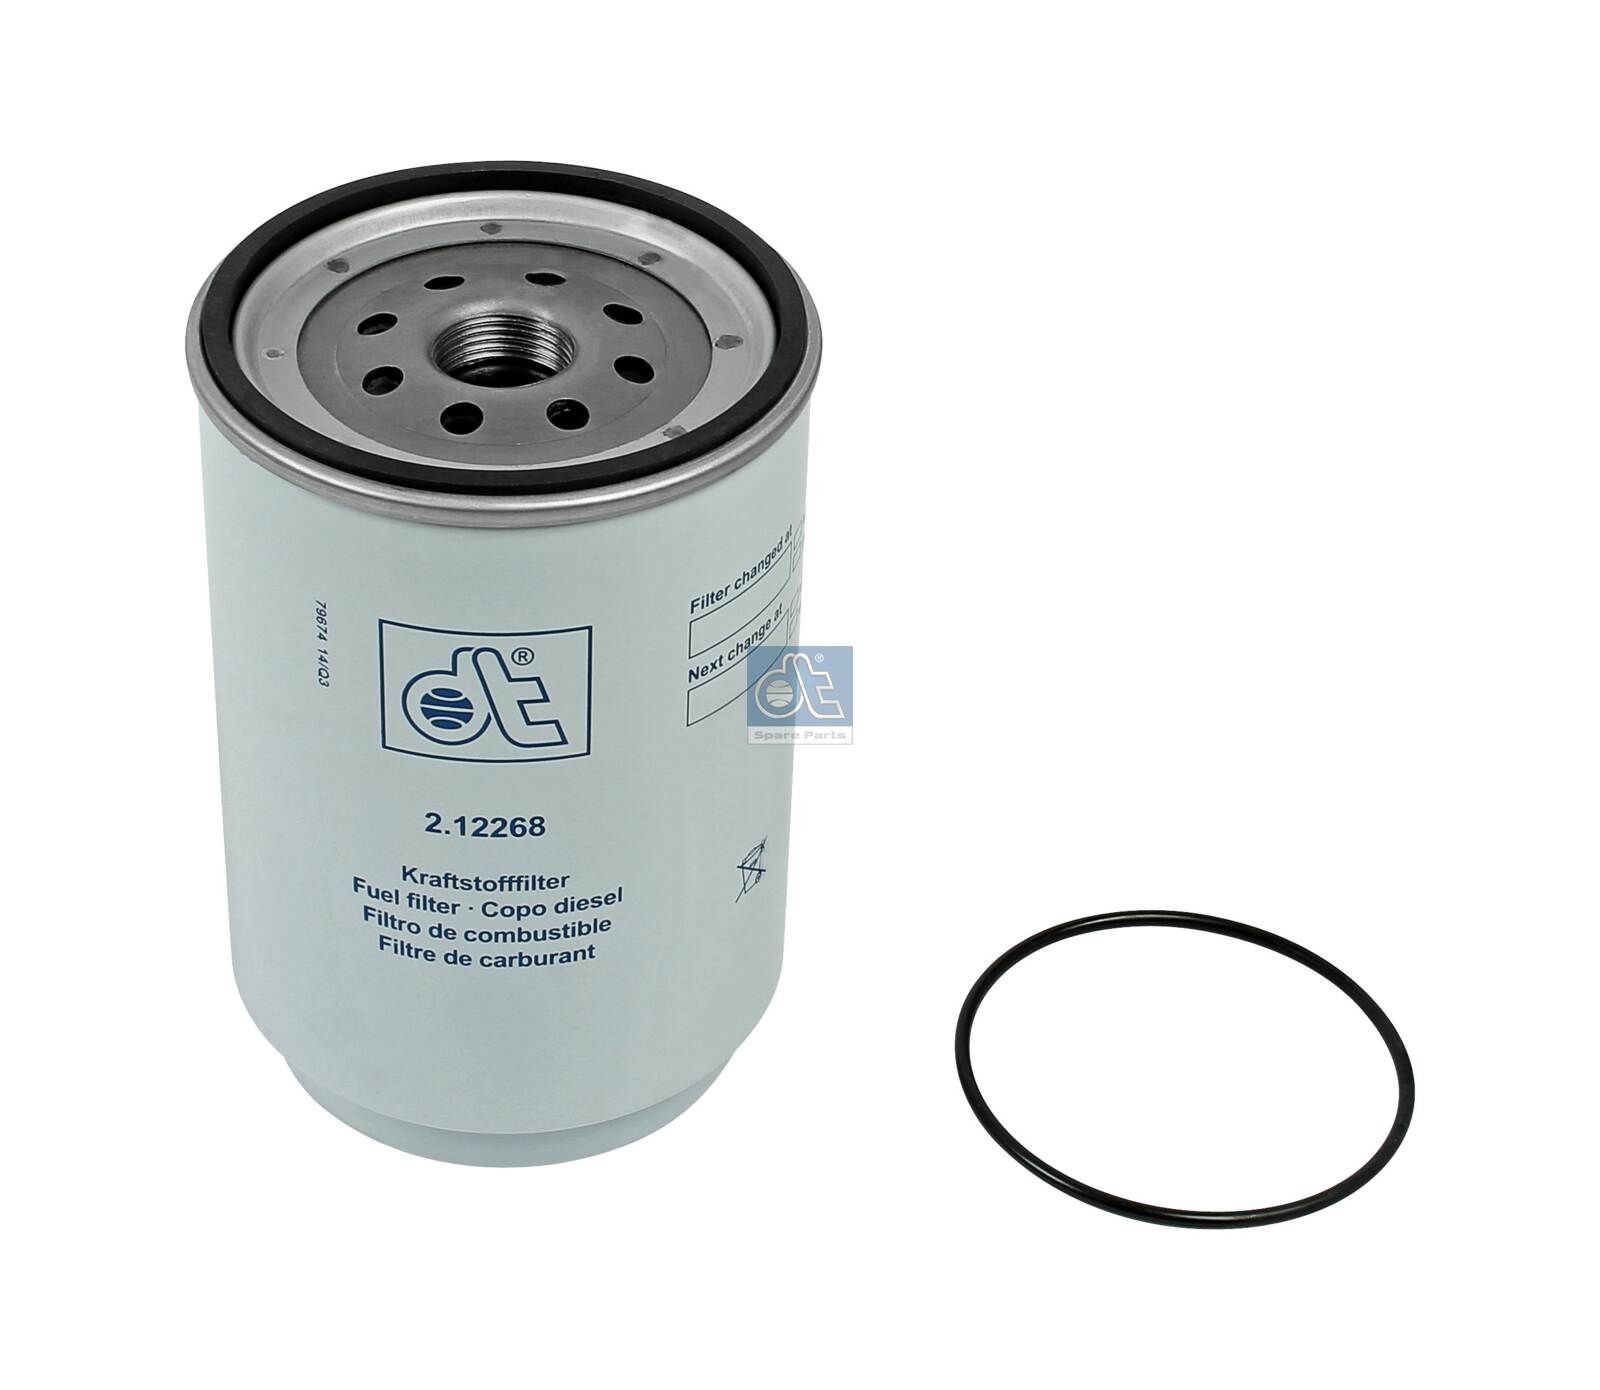 WK 11 001 x DT Spare Parts 2.12268 Fuel filter 20 539 578